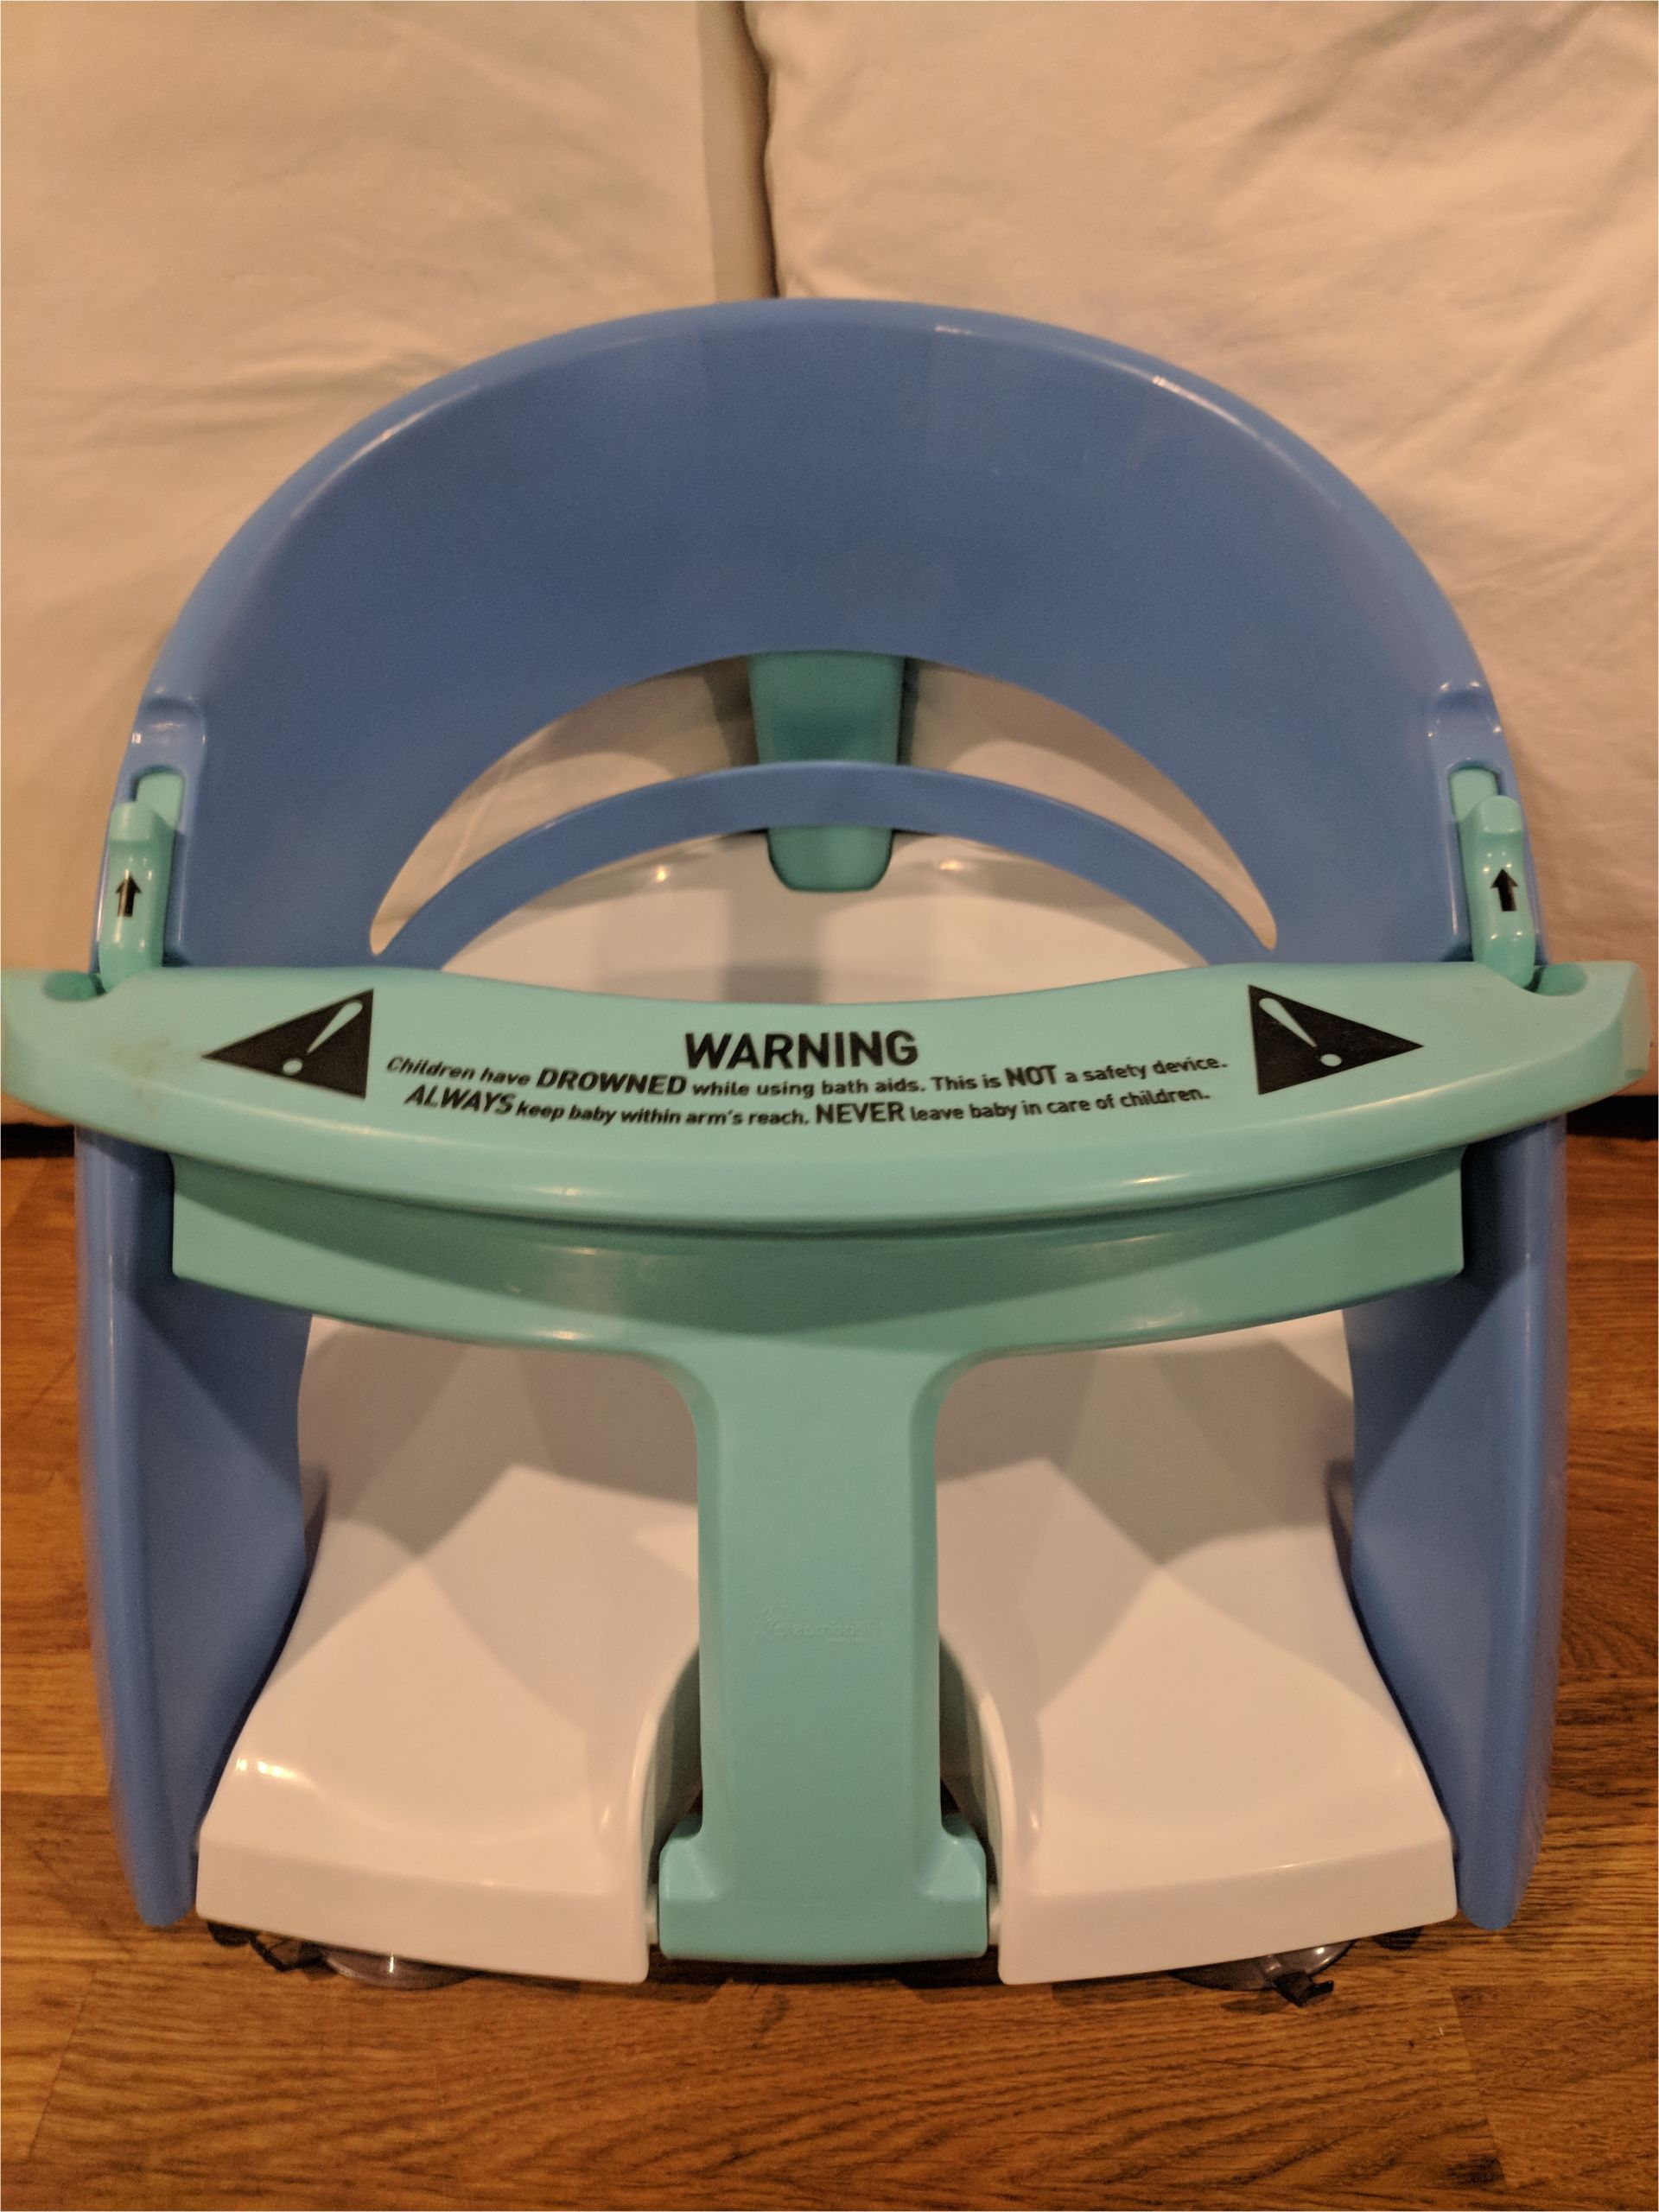 Baby Bath Seat Boots Dreambaby Deluxe Bath Seat Blue Little Marley